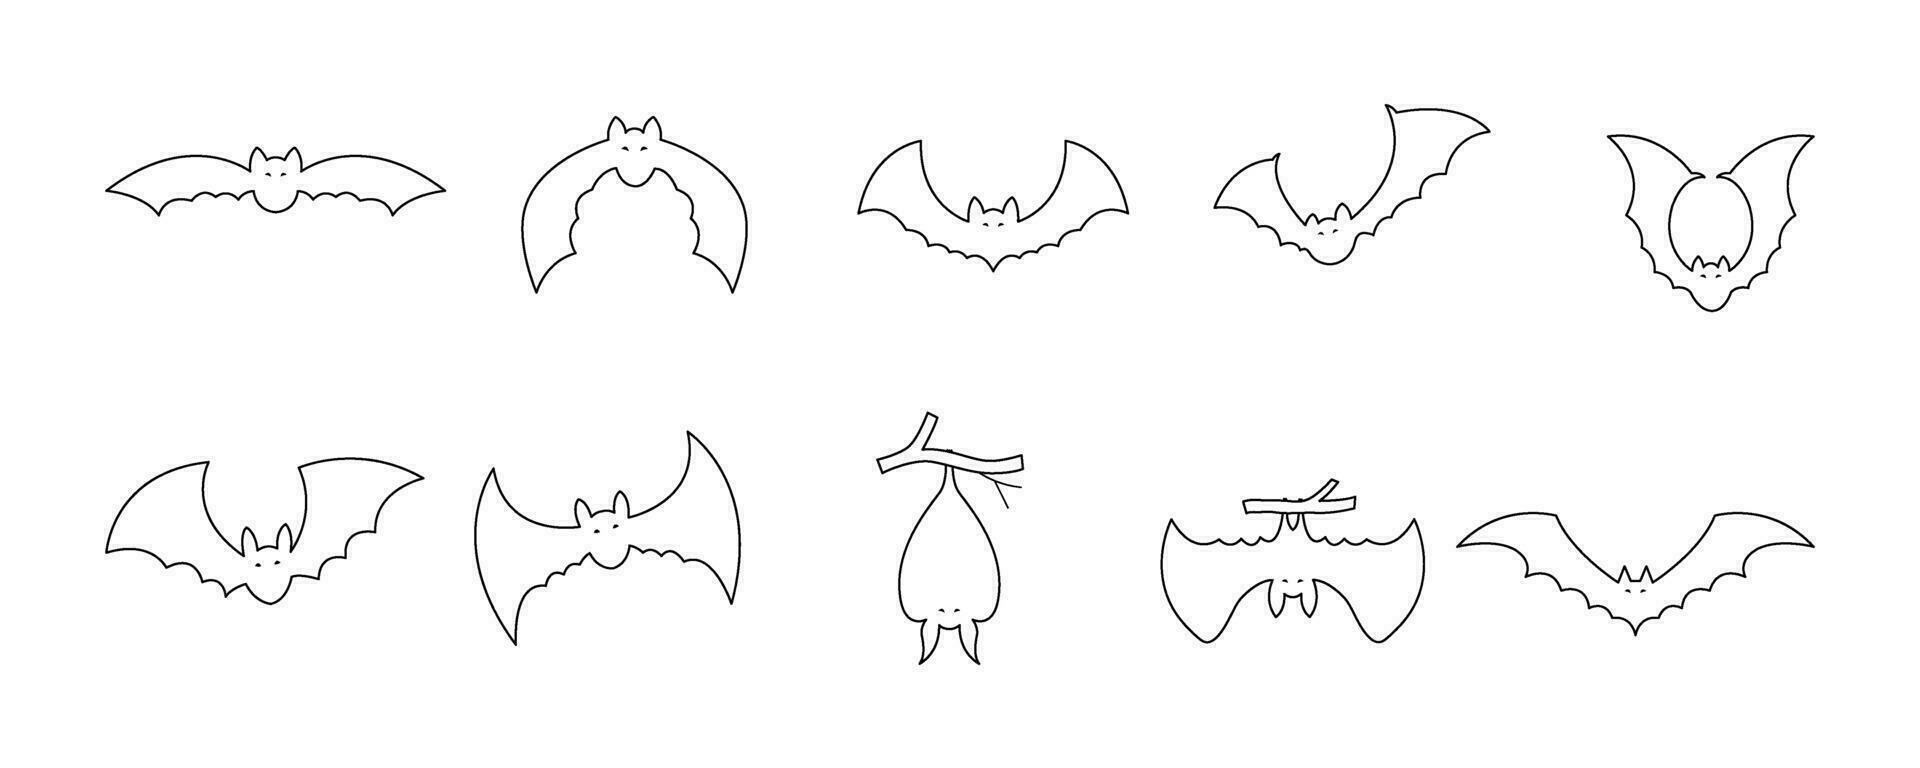 Set of line art bats for halloween. Halloween Elements and Objects for Design Projects. vector